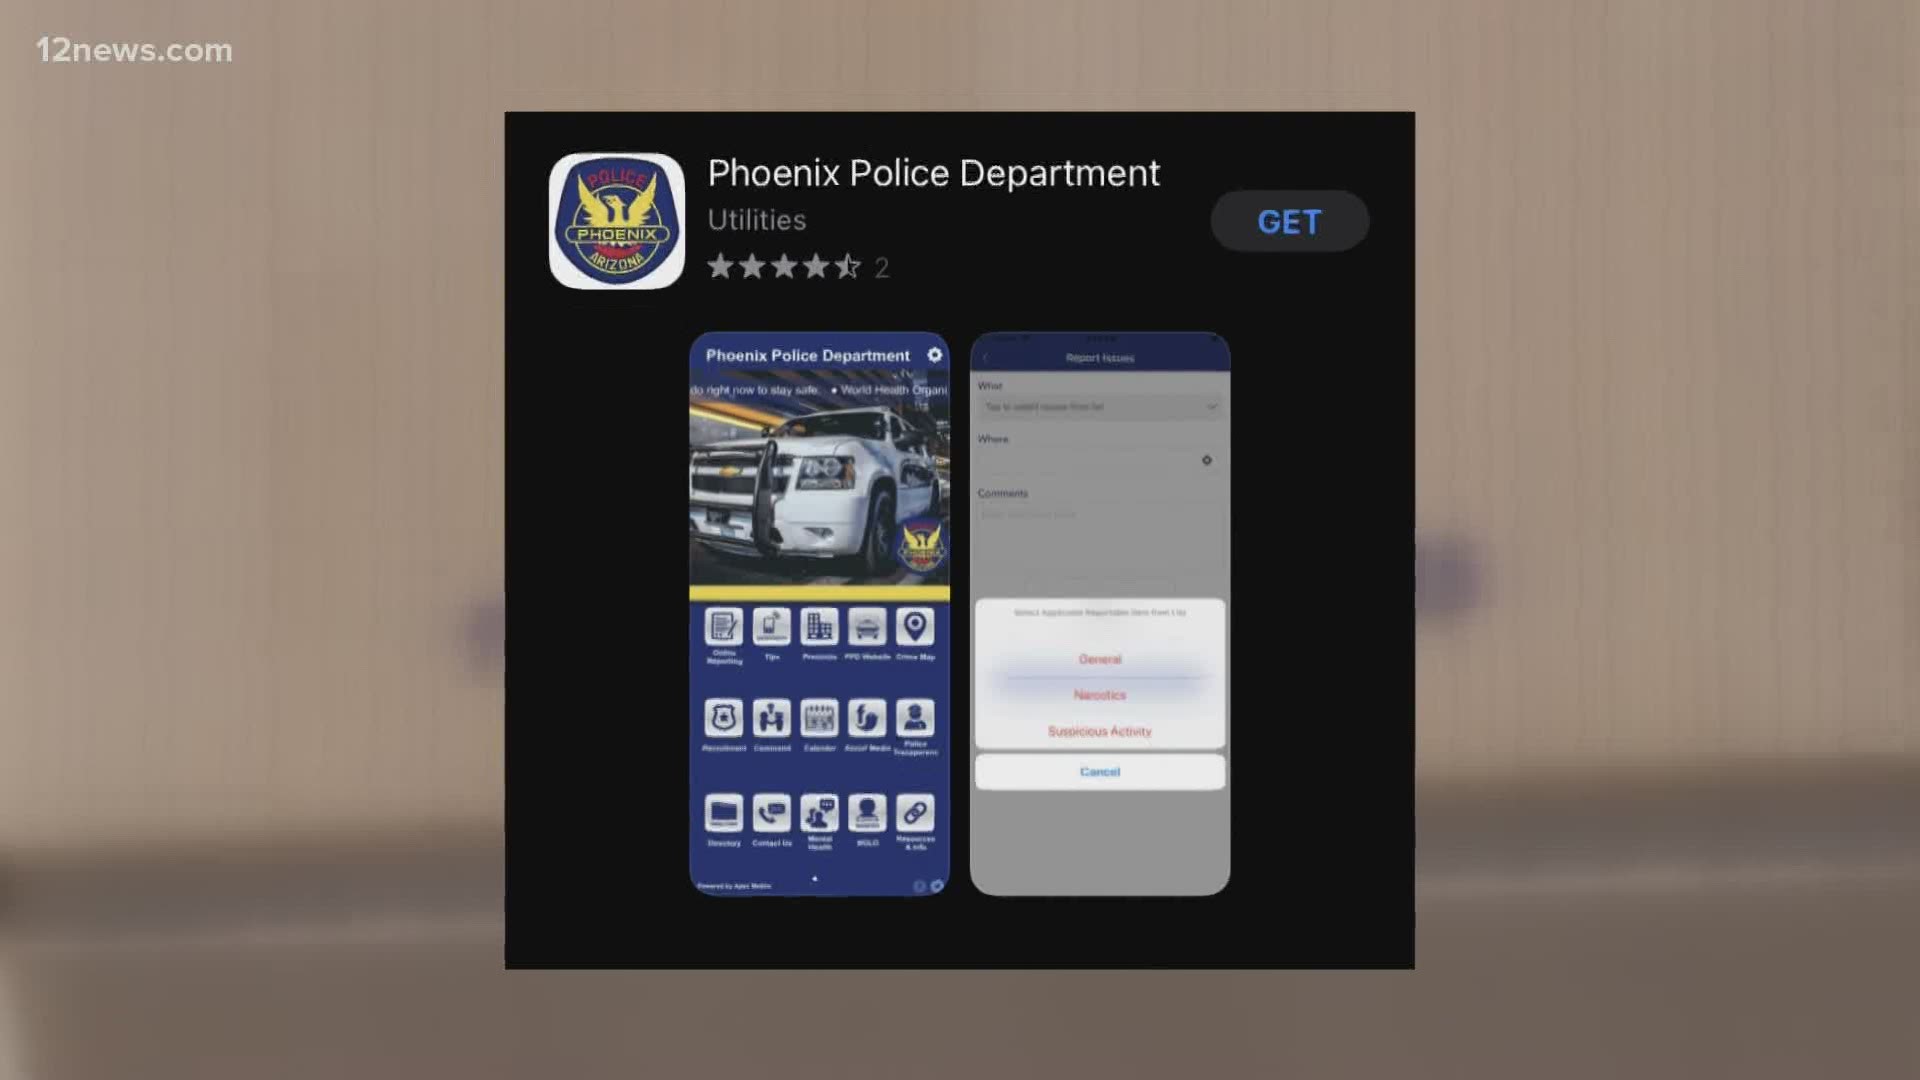 The app allows users to opt-in to emergency alerts to make sure communities are safe and able to make contact with officers quickly.